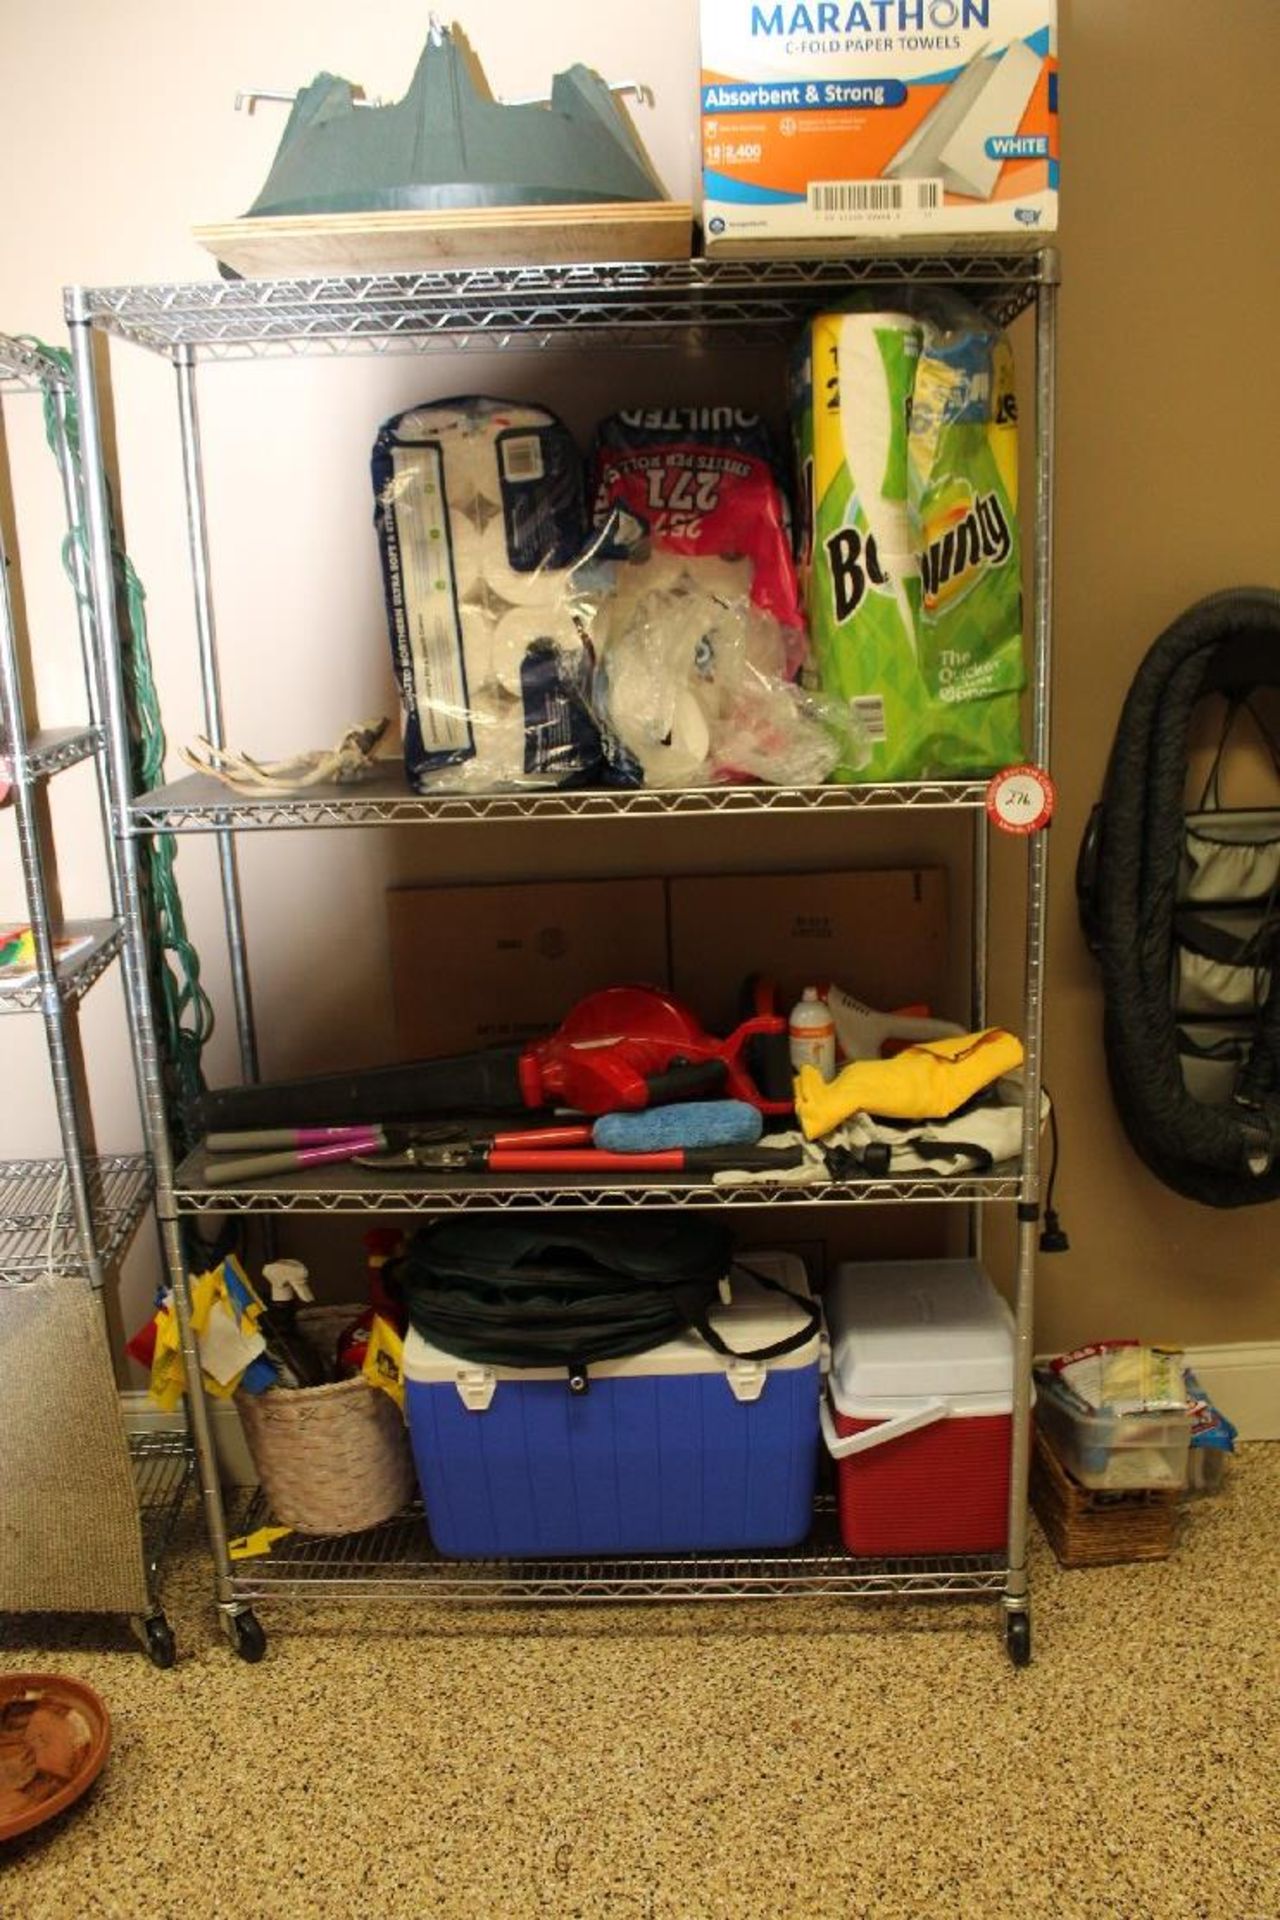 Metal Shelving Unit on Casters, 5 Shelves, Plus Contents (contents depicted in photo subject to